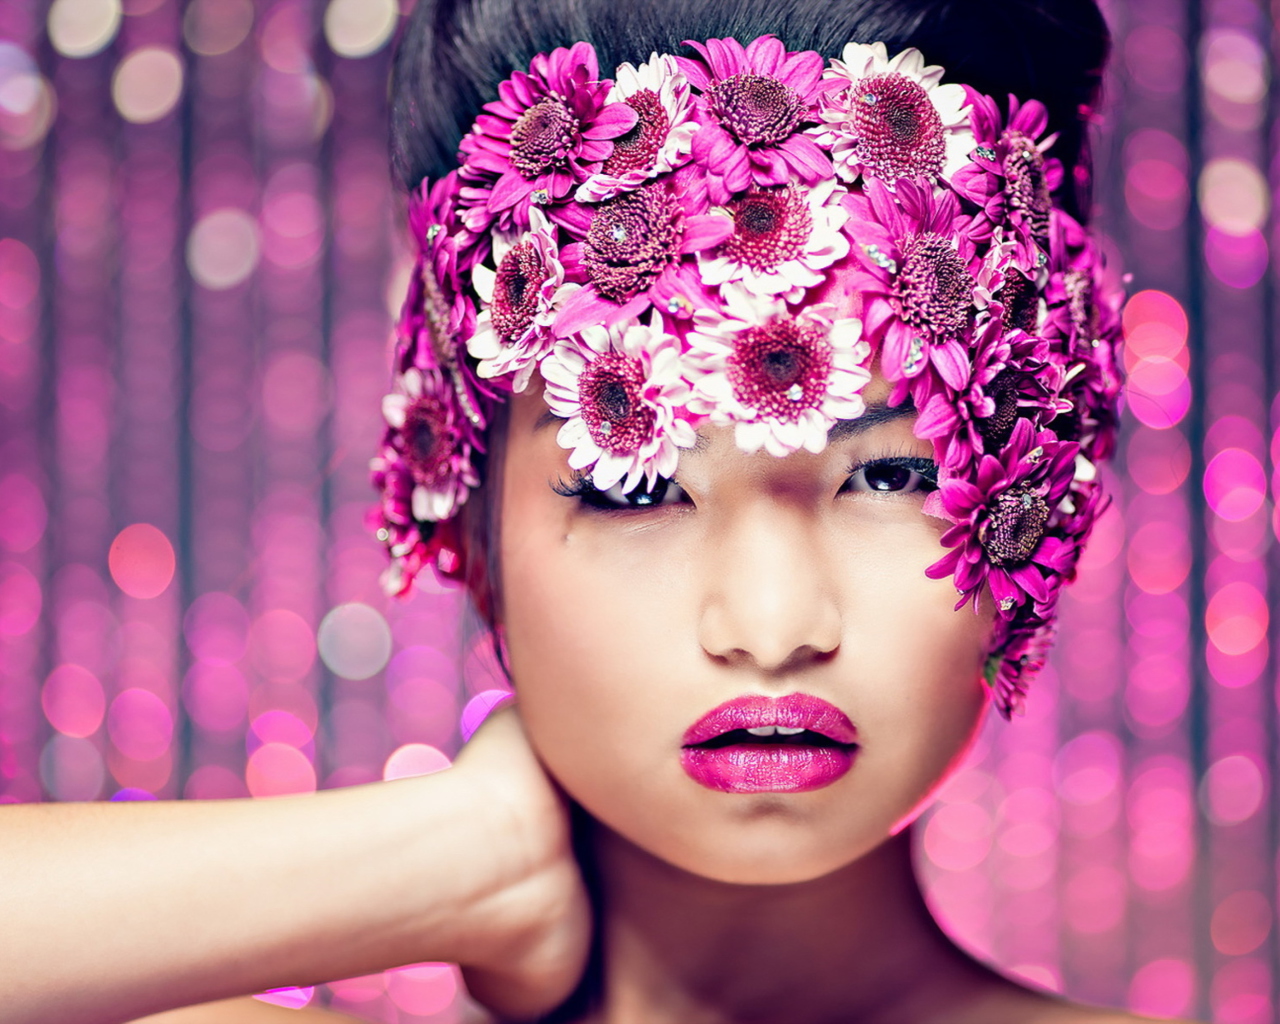 Asian Fashion Model With Pink Flower Wreath wallpaper 1280x1024